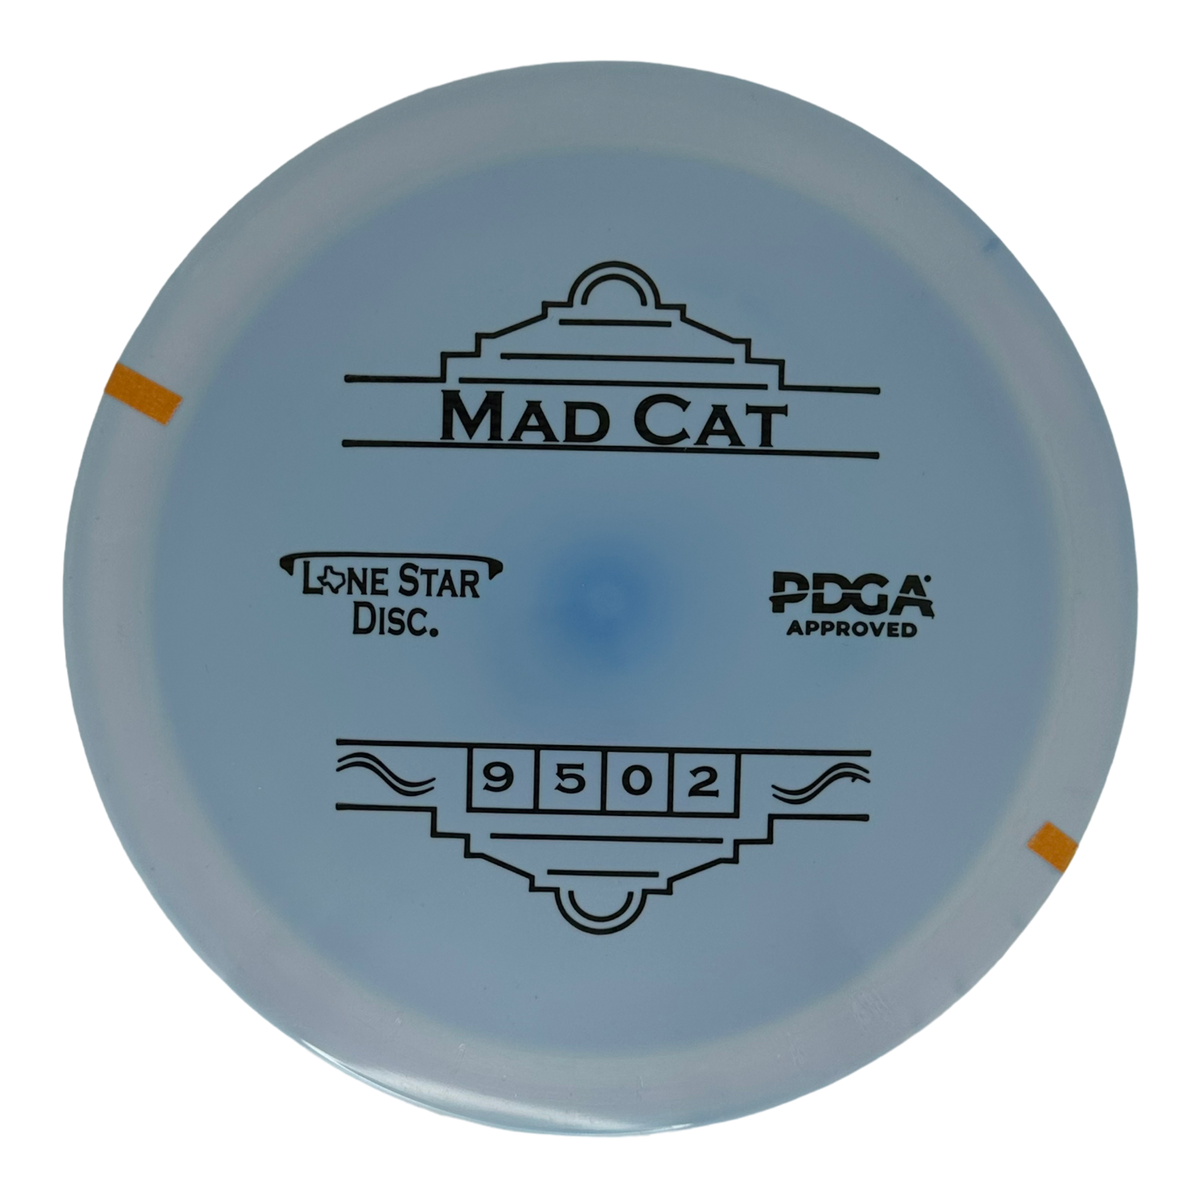 Lone Star Disc Lima Mad Cat